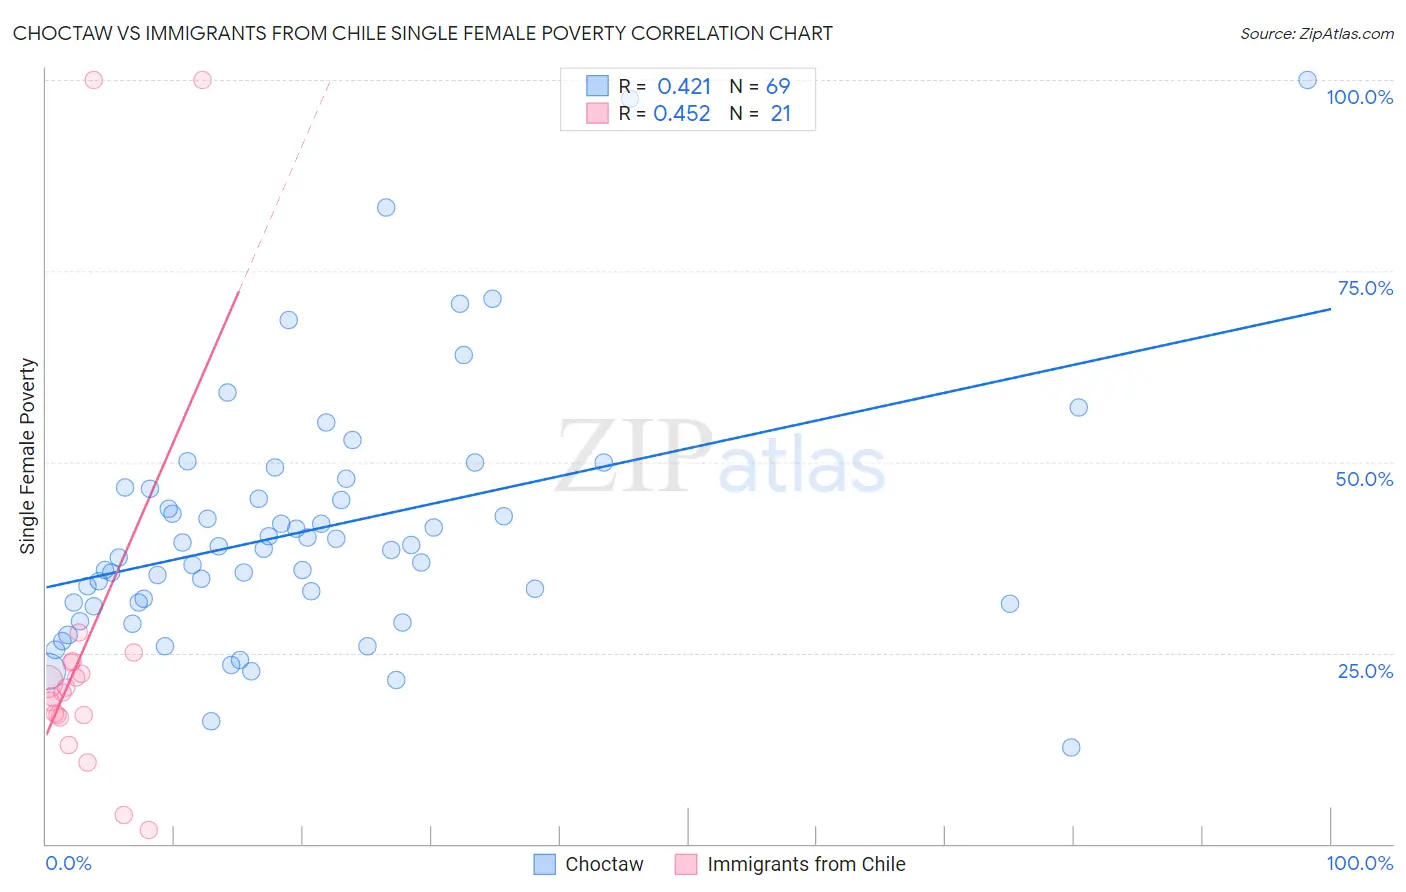 Choctaw vs Immigrants from Chile Single Female Poverty